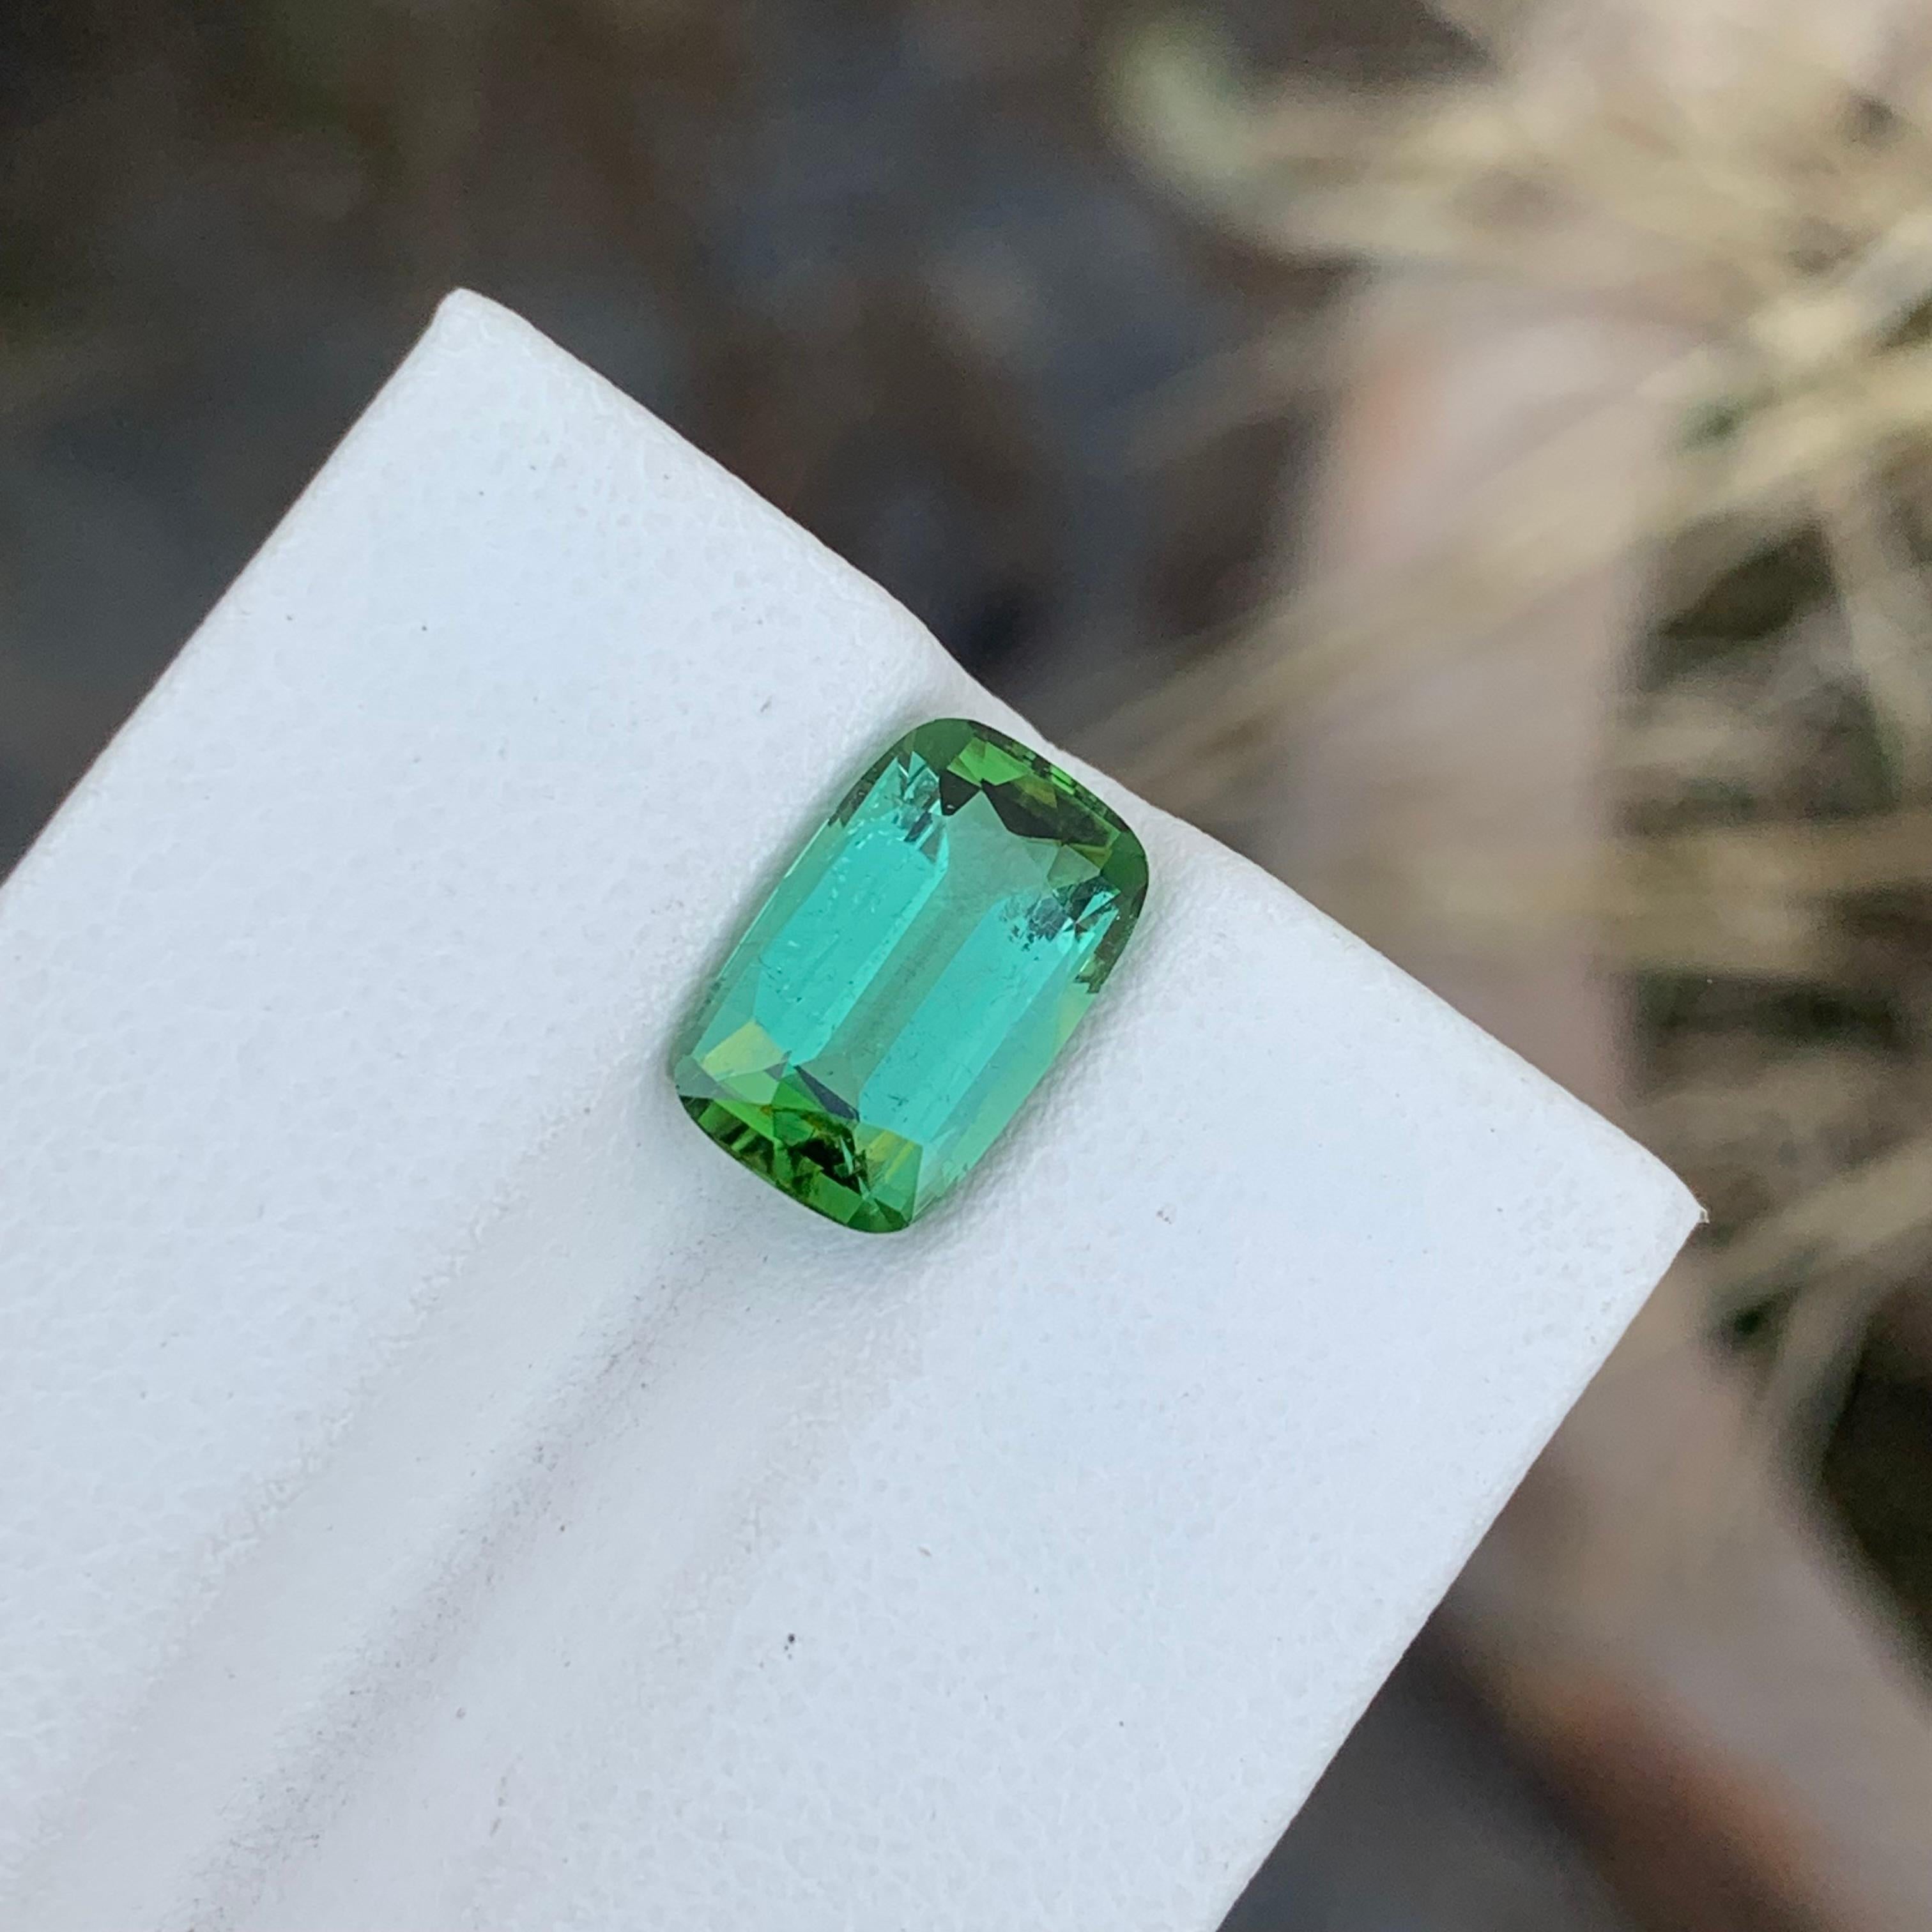 Loose Mint Green Tourmaline
Weight: 3.10 Carats
Dimension: 11 x 7 x 4.9 Mm
Colour : Mint Green
Origin: Afghanistan
Shape: Long Cushion 
Certificate: On Demand
Treatment: Non

Mint tourmaline, a delicate and soothing variety within the tourmaline